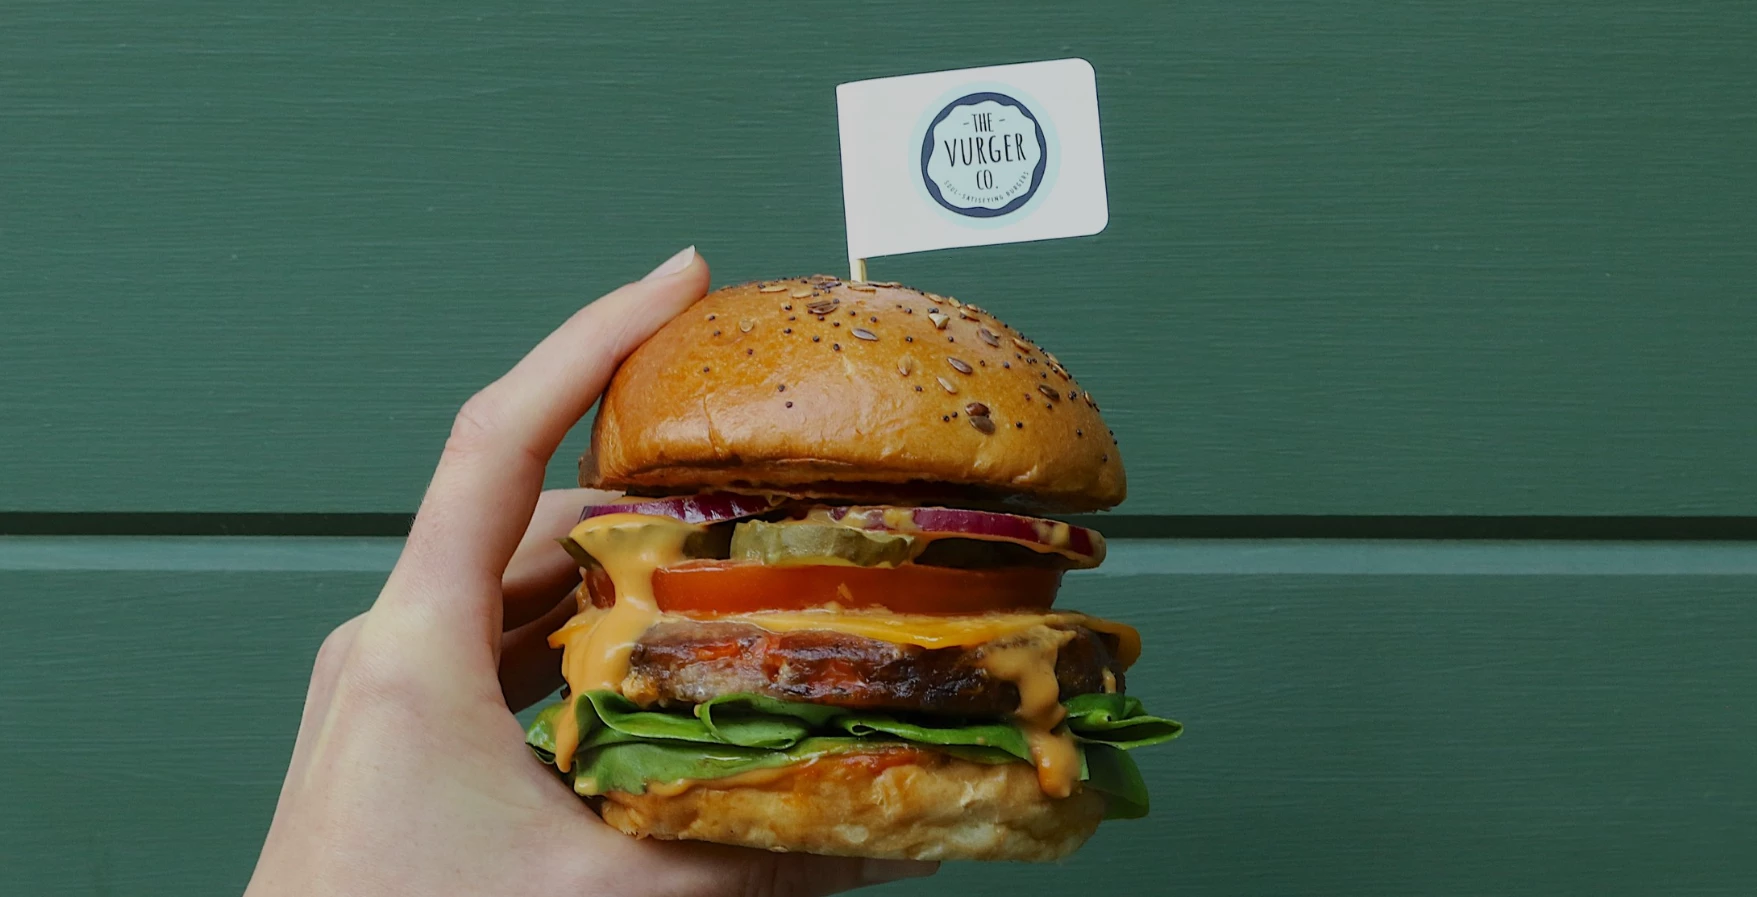 The Vurger Co. has smashed its Crowdfunding target and raised £300k.